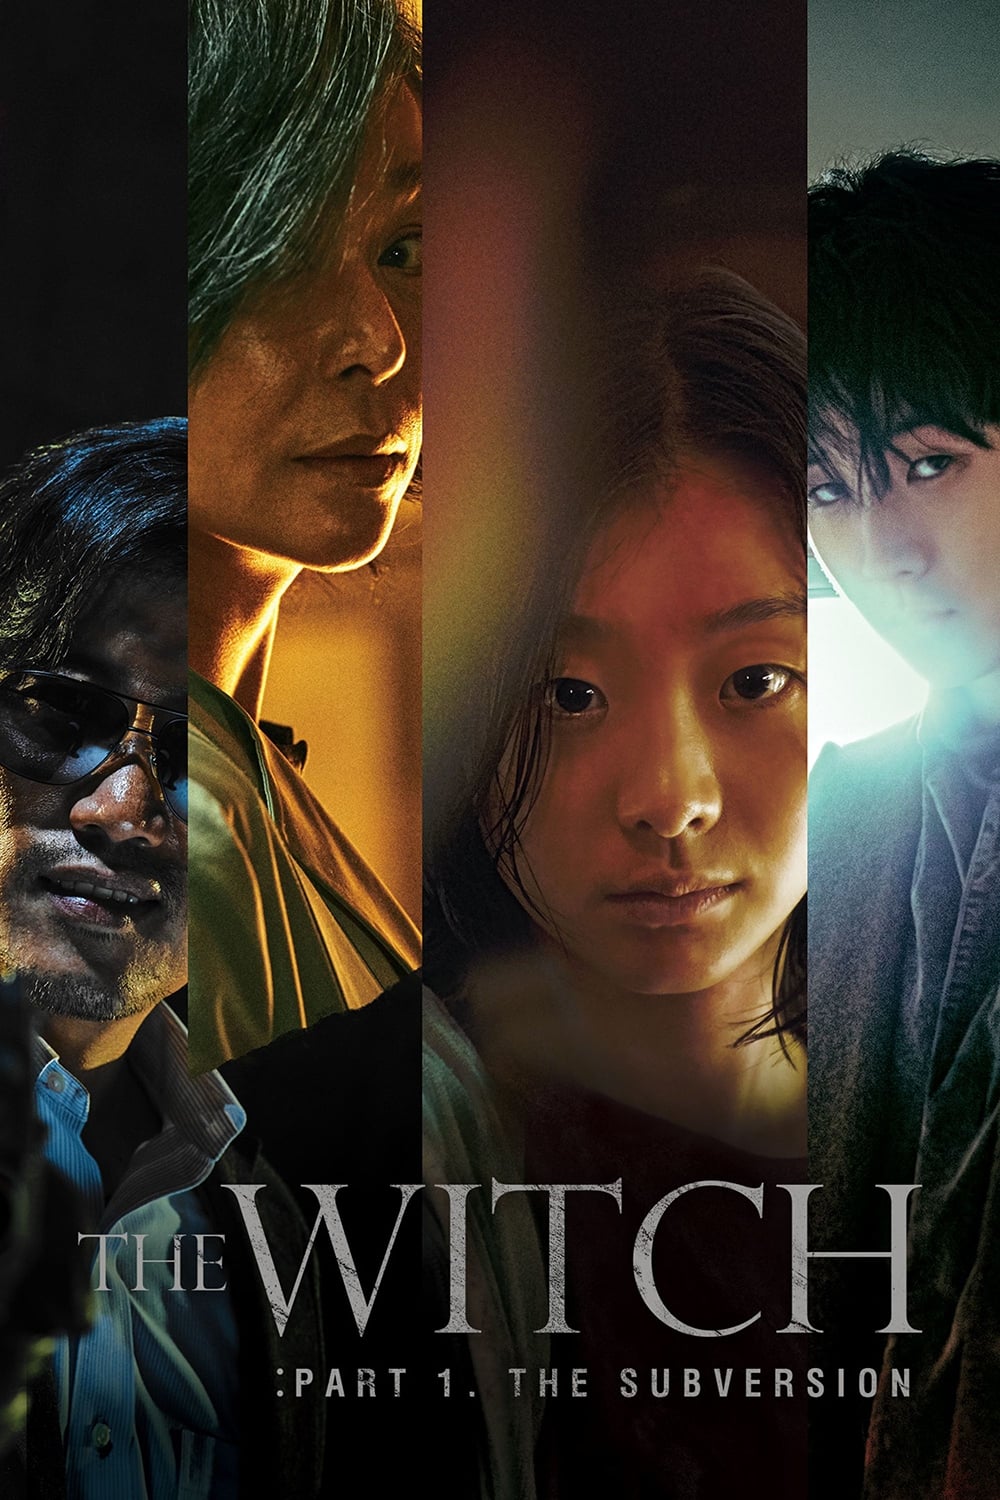 The Witch Part 1 – The Subversion 2018